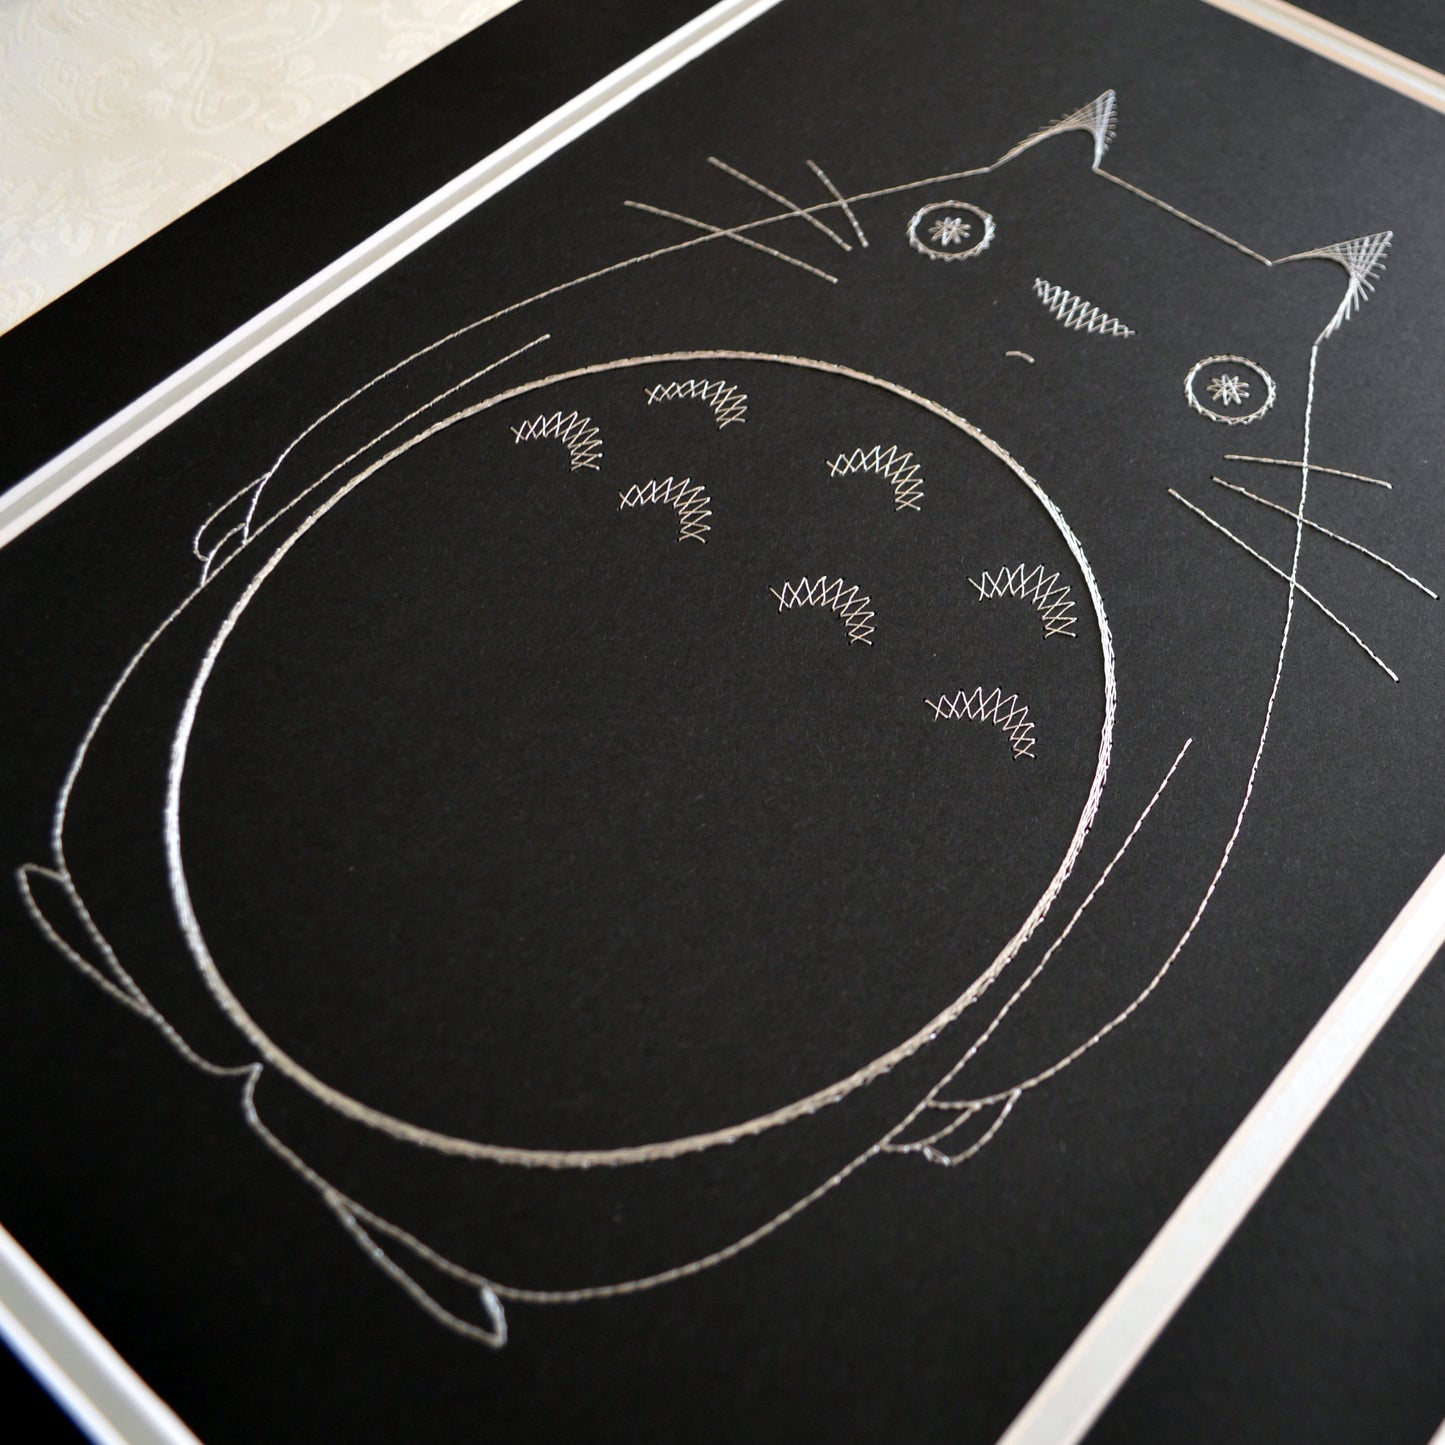 My Neighbour Totoro Inspired Card Embroidery Kit (Black Card)